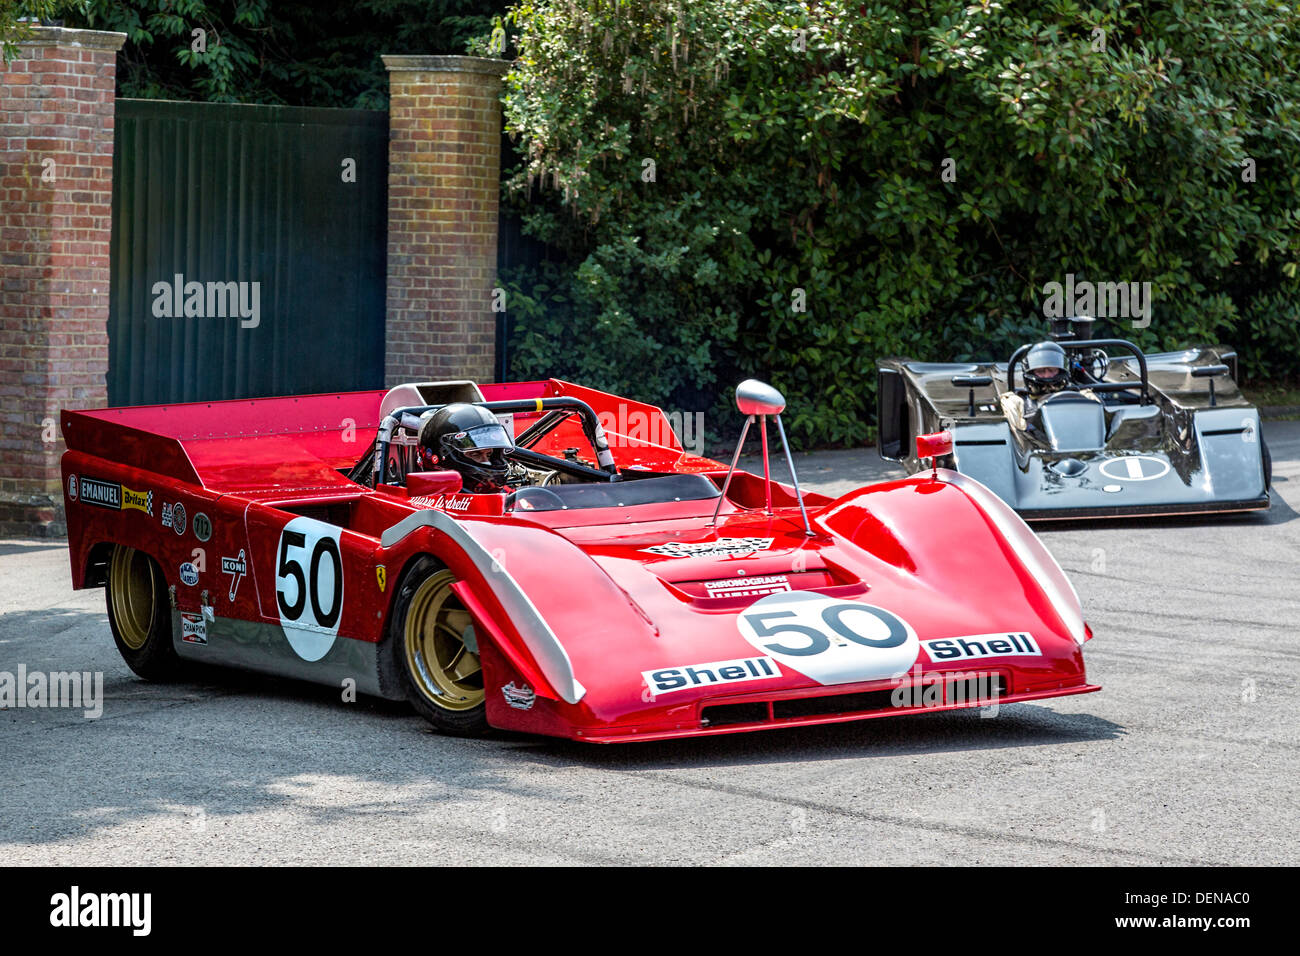 1971 Ferrari 712 CanAm with driver Paul Knapfield at the 2013 Goodwood Festival of Speed, Sussex, UK. Stock Photo